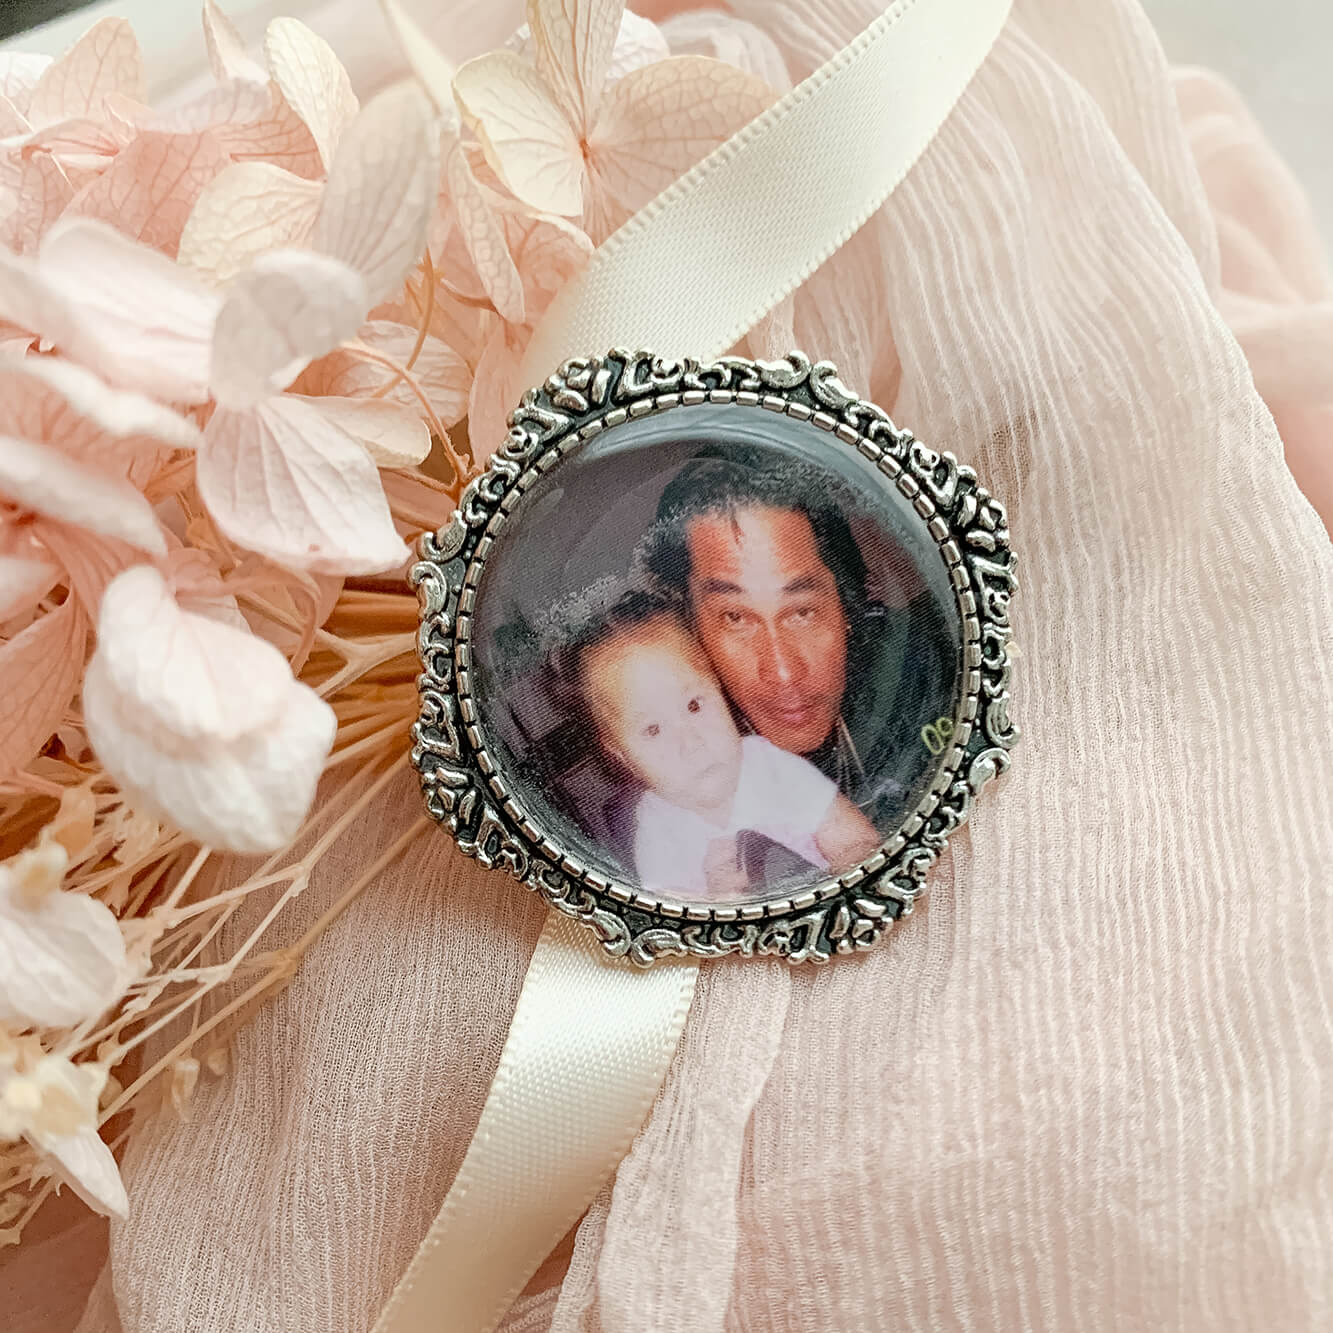 A memorial brooch or memorial pin in the design called Lace, showing a photo of a father and his child. The pin is nestled on soft peach fabric and dried hydrangeas and is intended to be pinned to a wedding bouquet or wedding jacket to include a deceased relative on your wedding day.